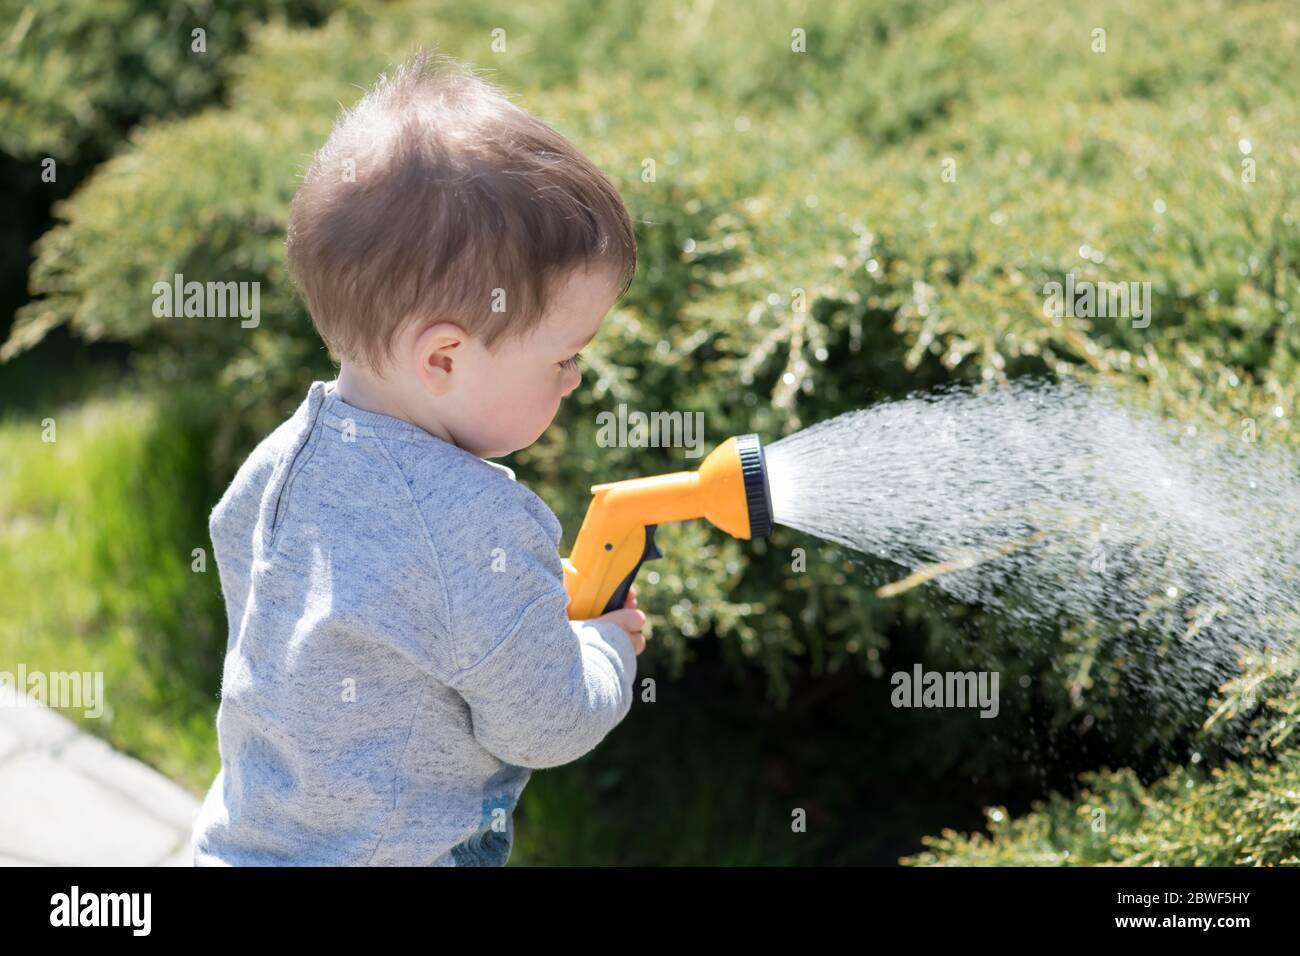 Small boy with watering can watering trees on backyard. Happy childhood concept Stock Photo